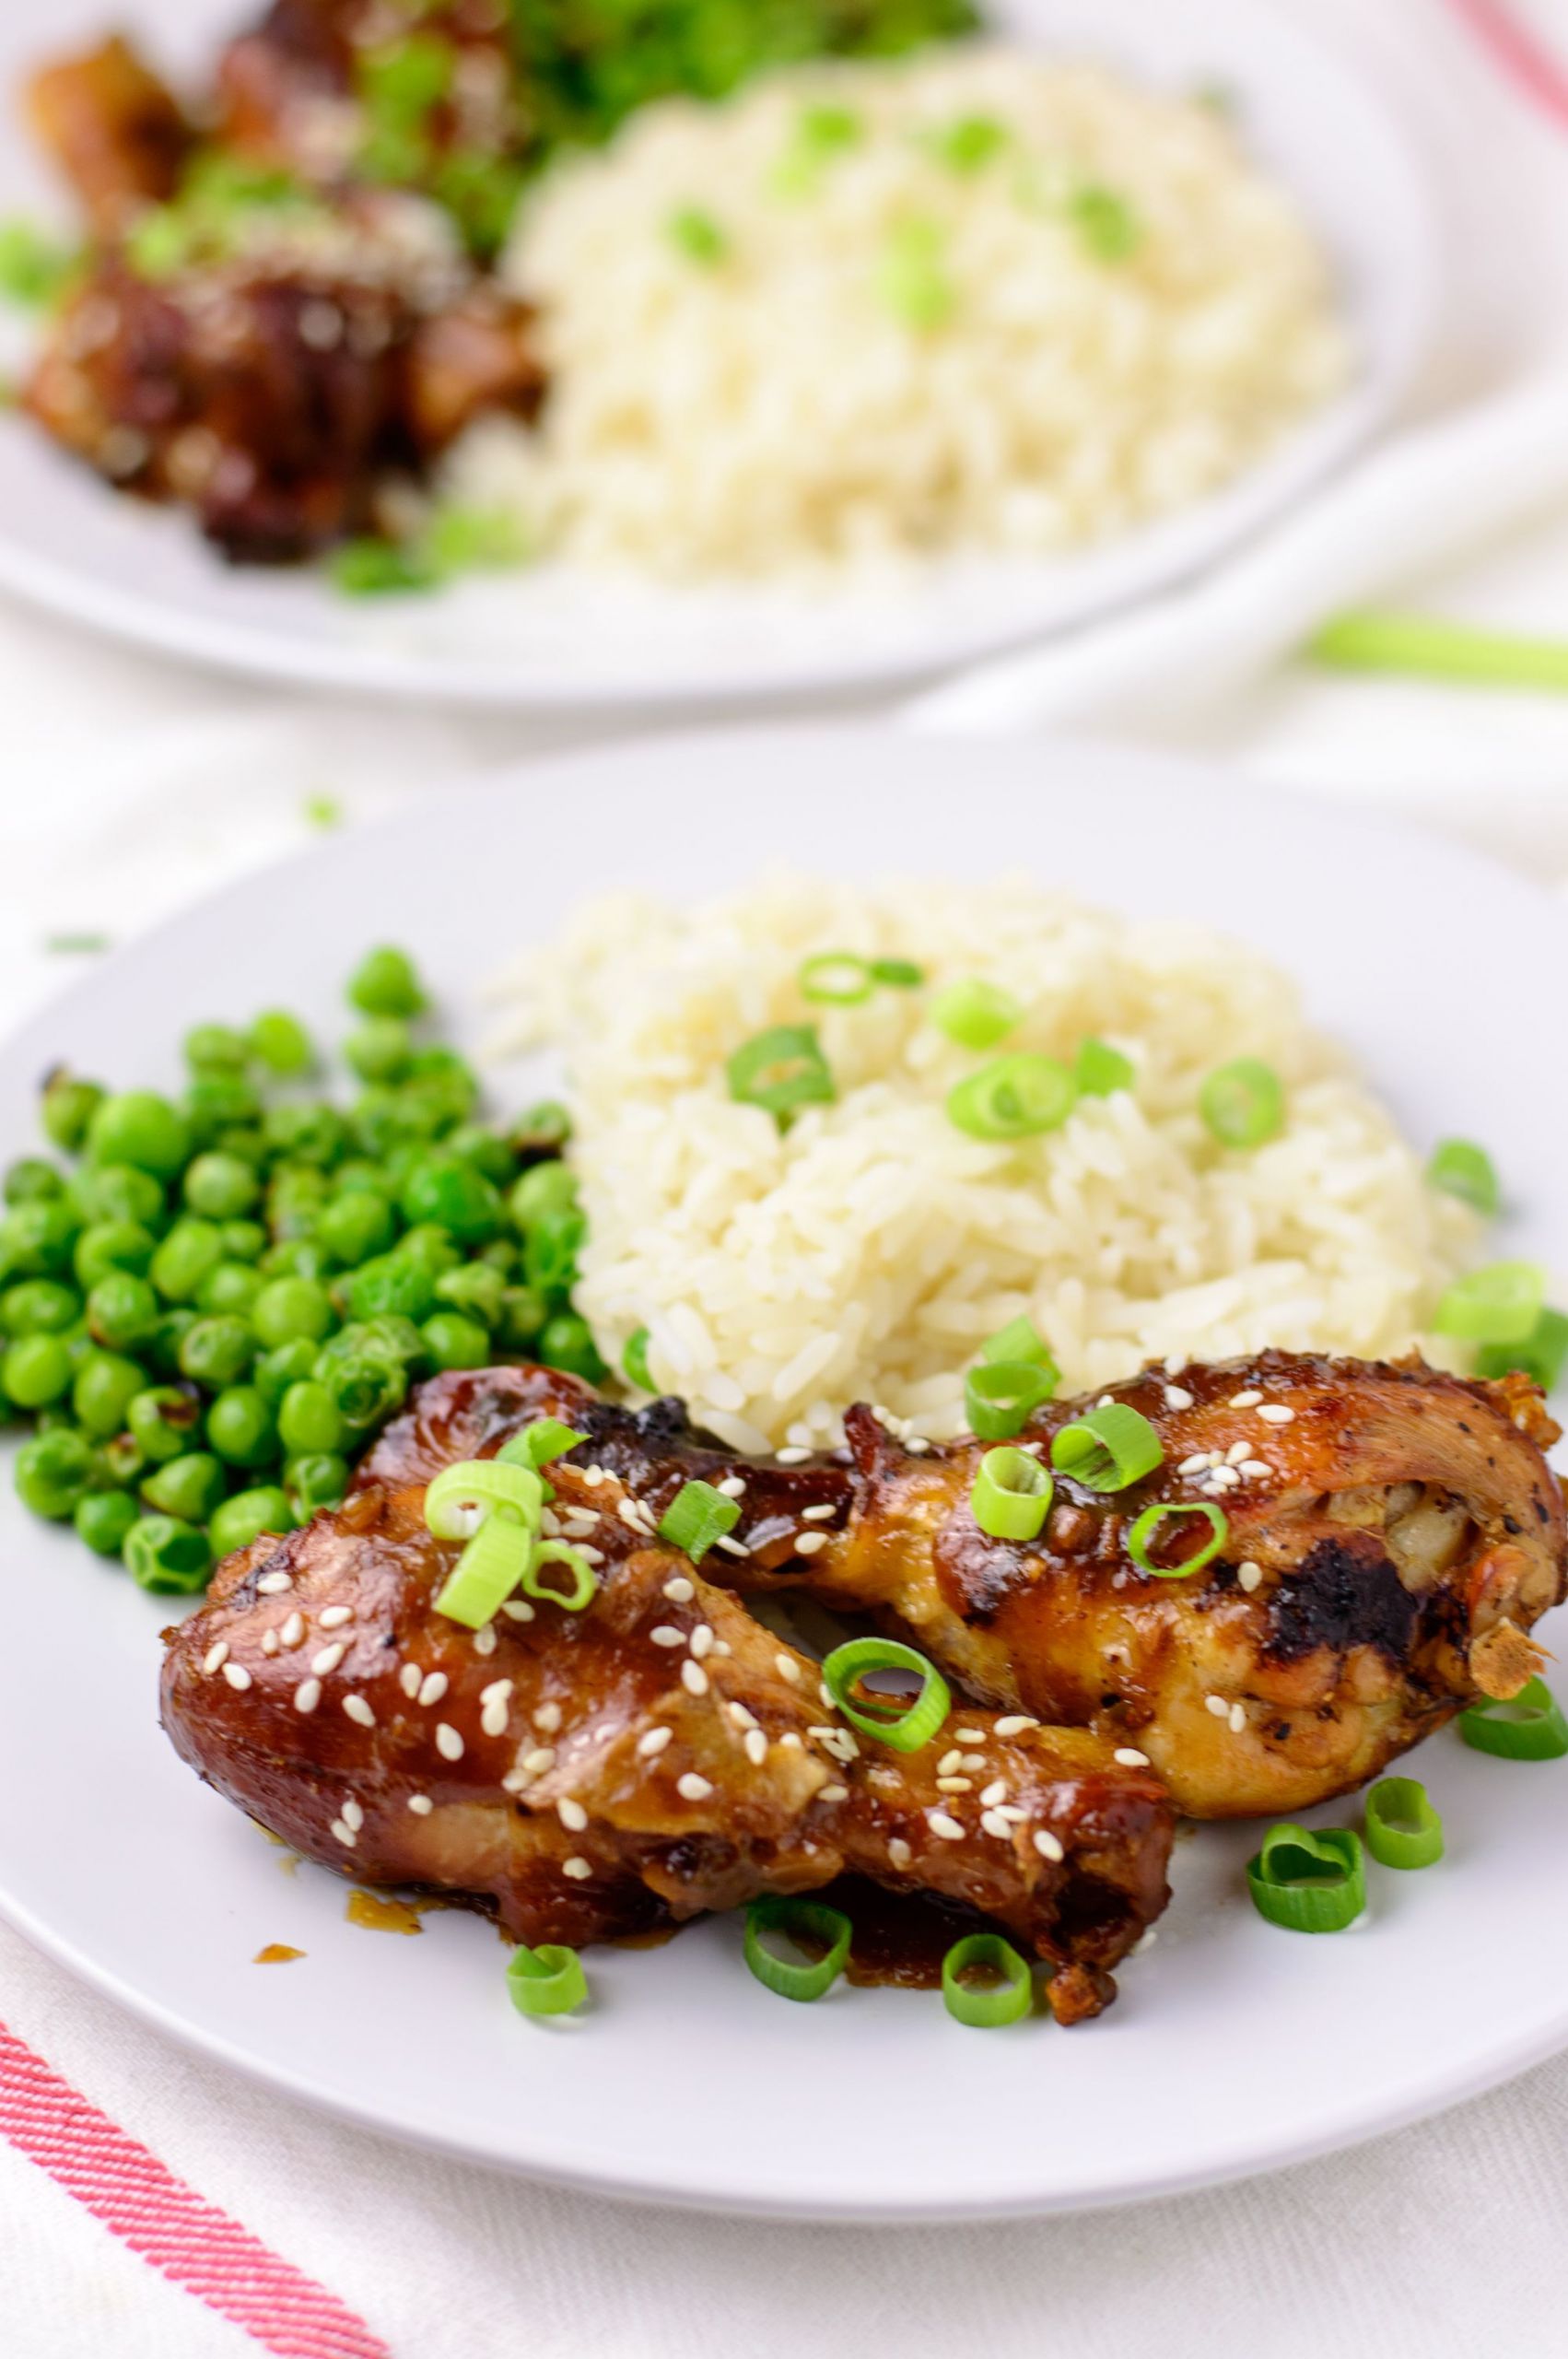 Healthy Chicken Drumstick Slow Cooker Recipes
 Slow cooker Teriyaki chicken drumsticks Recipe